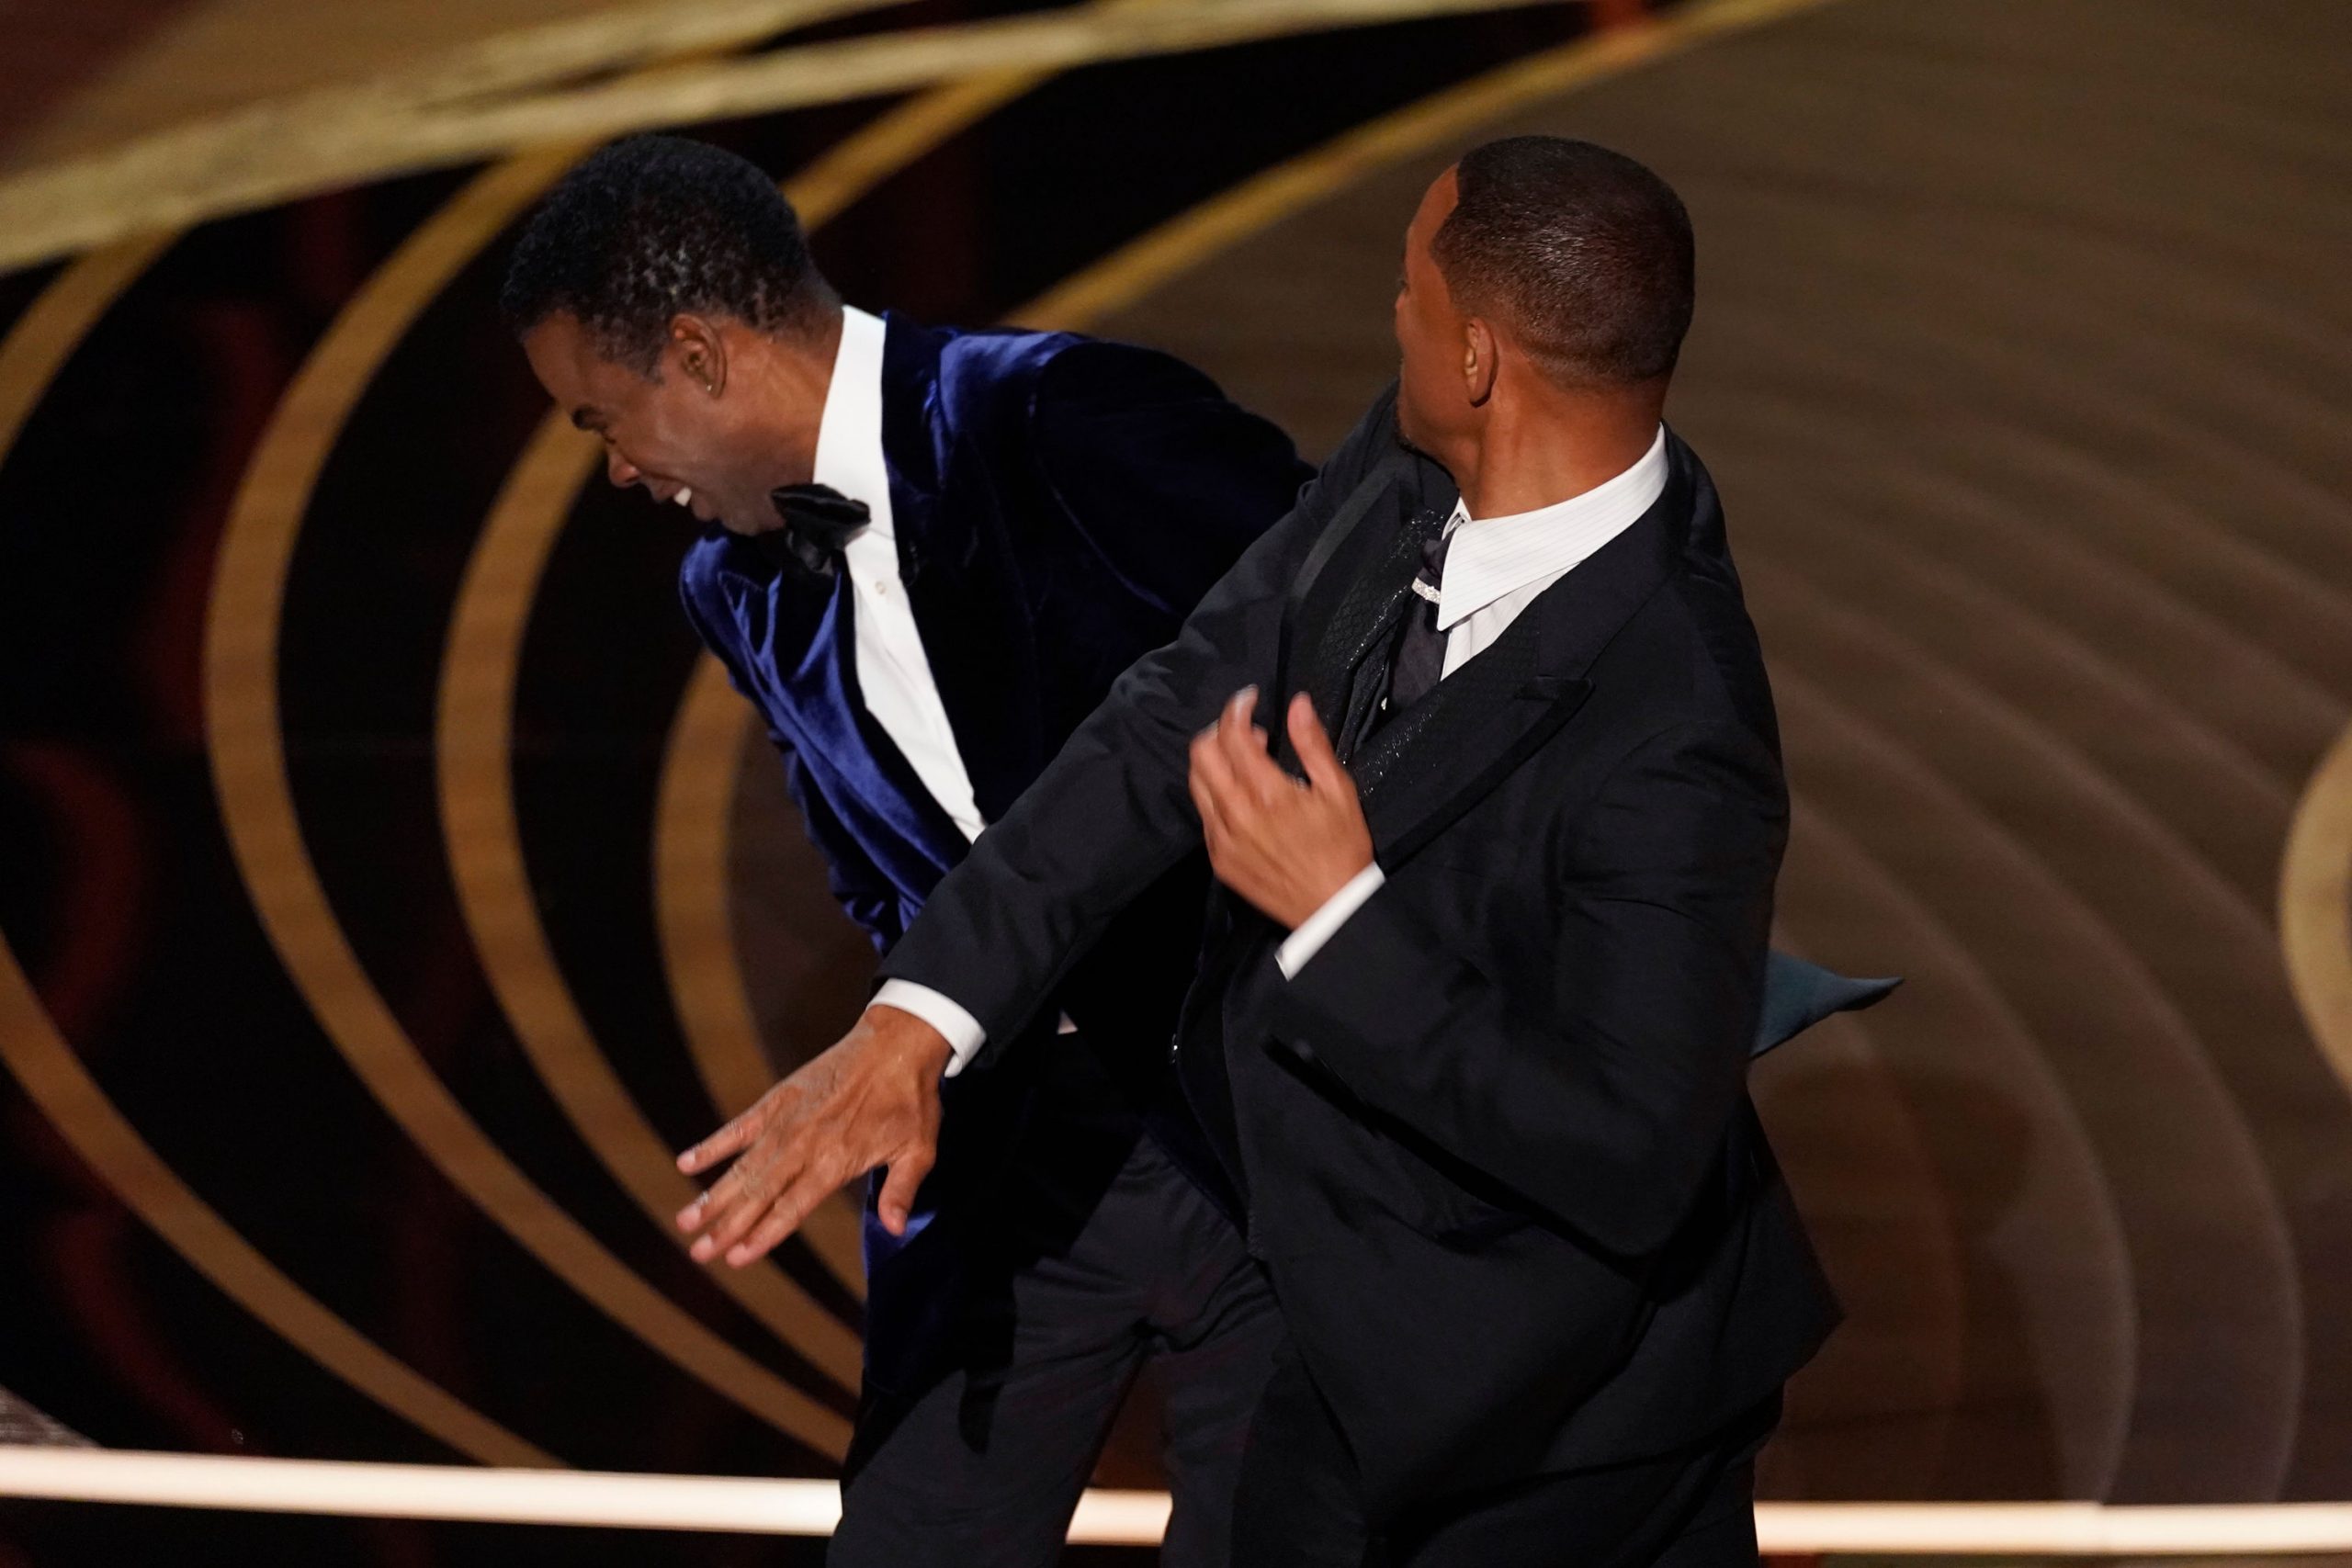 Expensive tickets, more clout: Aftermath of Will Smith’s slap for Chris Rock